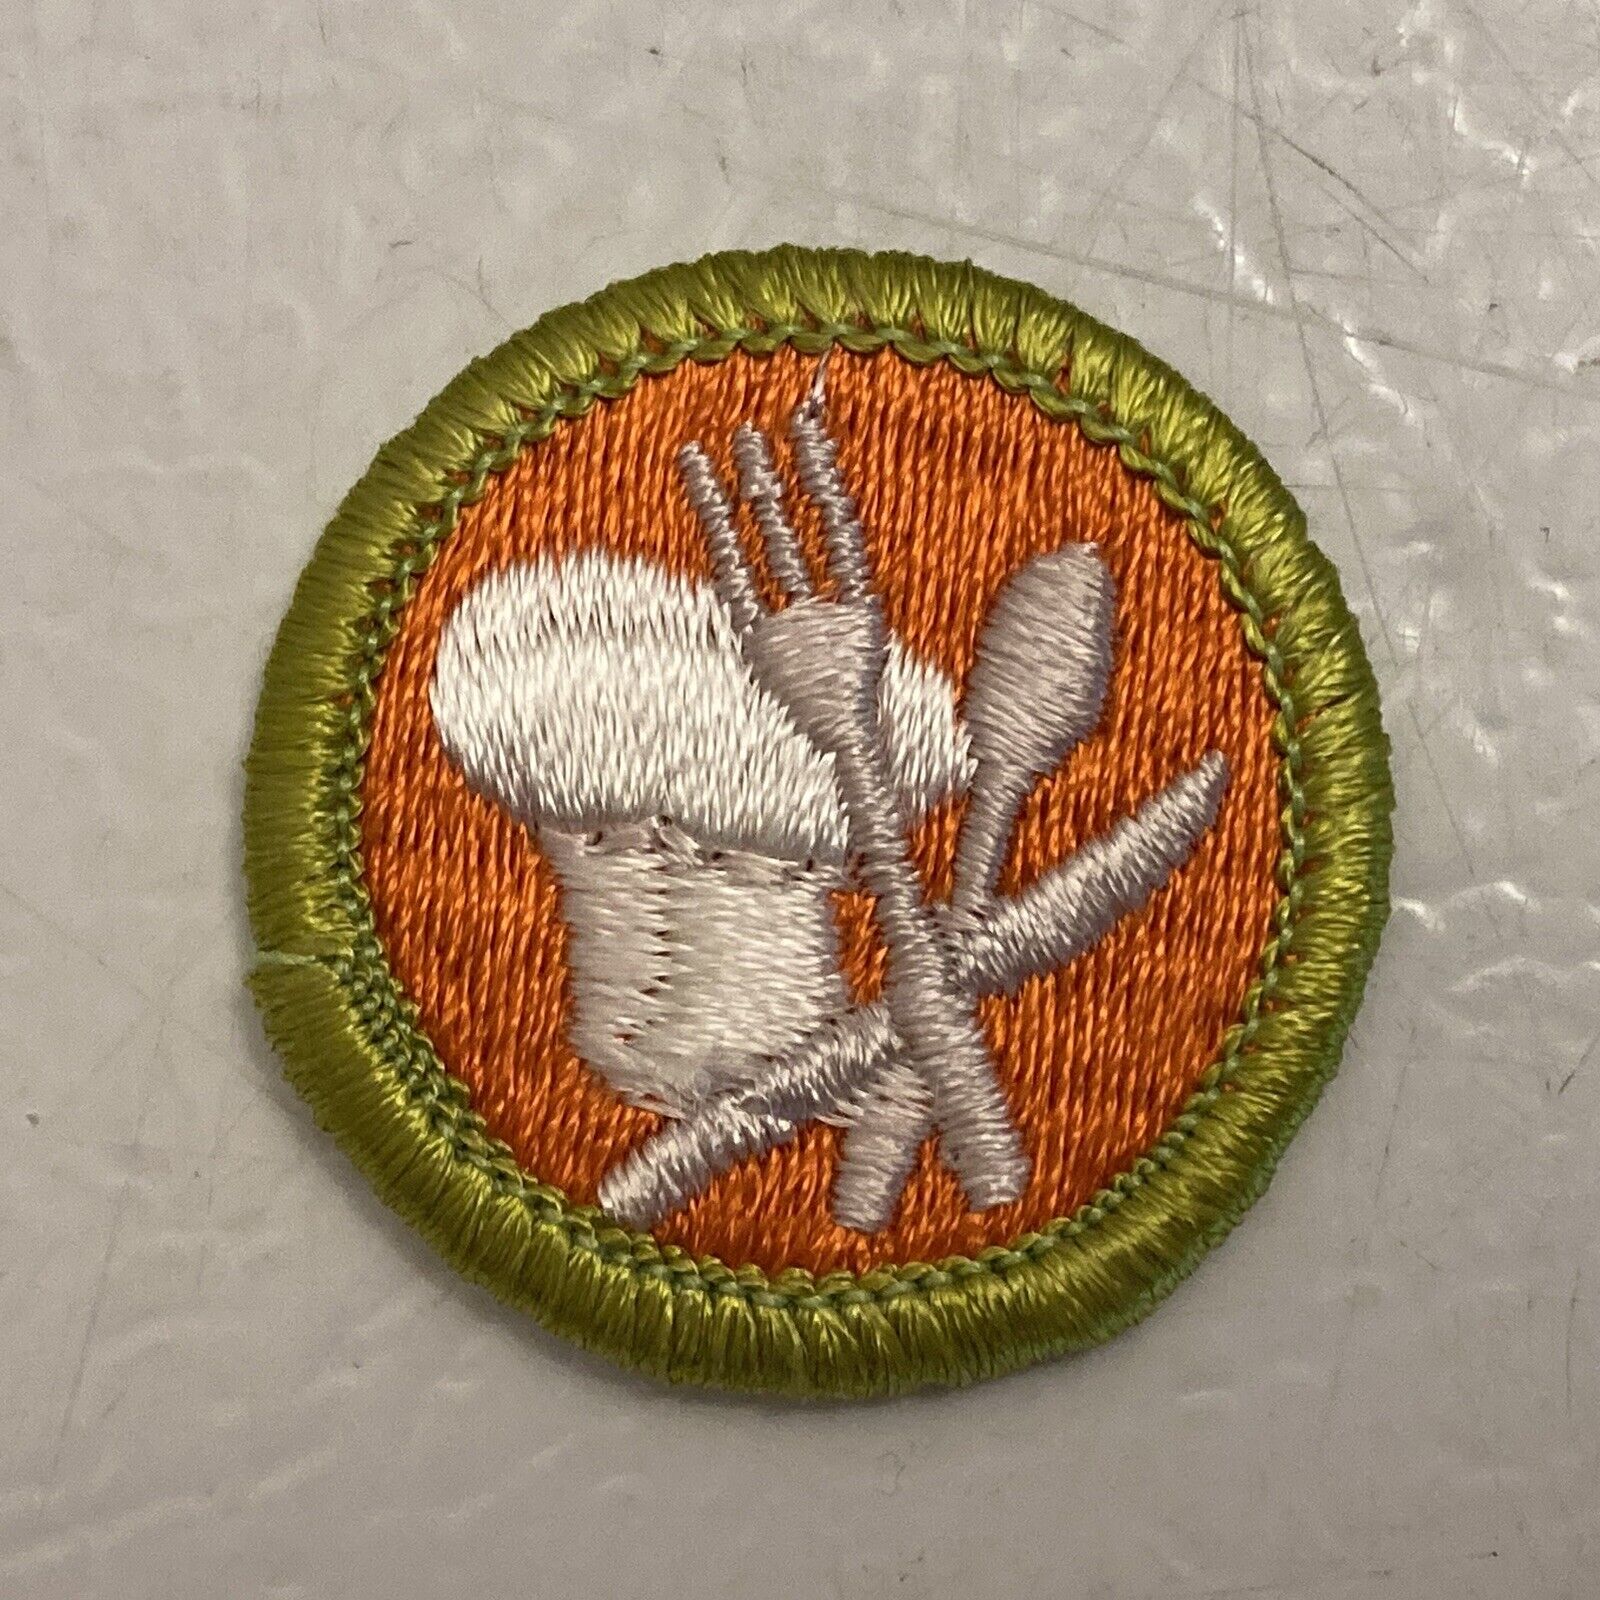 Cooking Merit Badge green border Patch - Boy Scouts of America vintage 1980s (?)